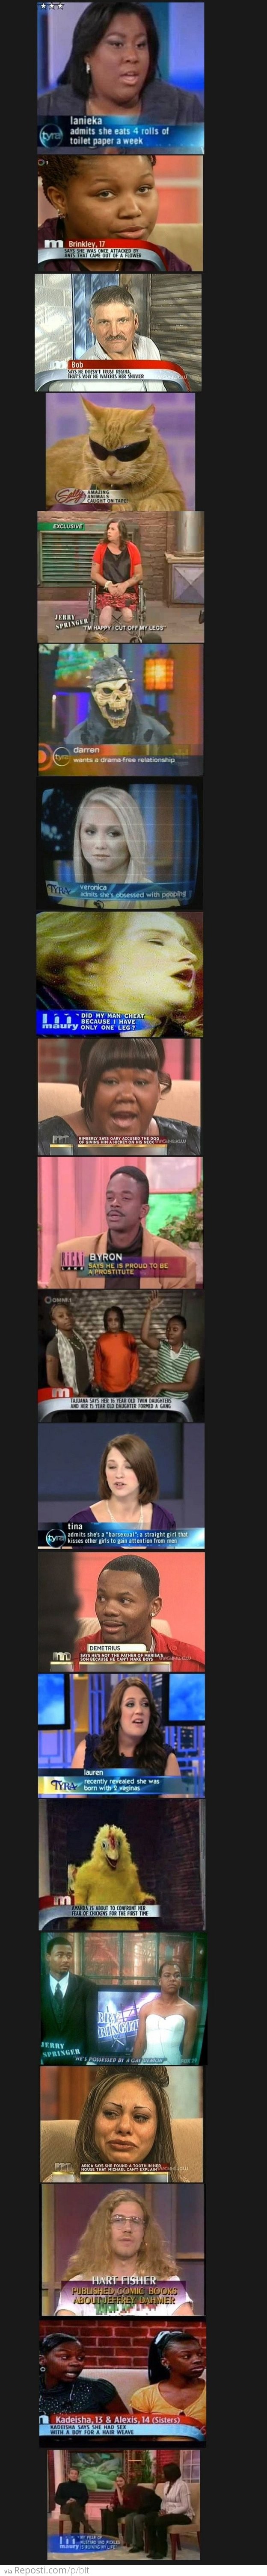 Daytime Talk Shows Are Awesome